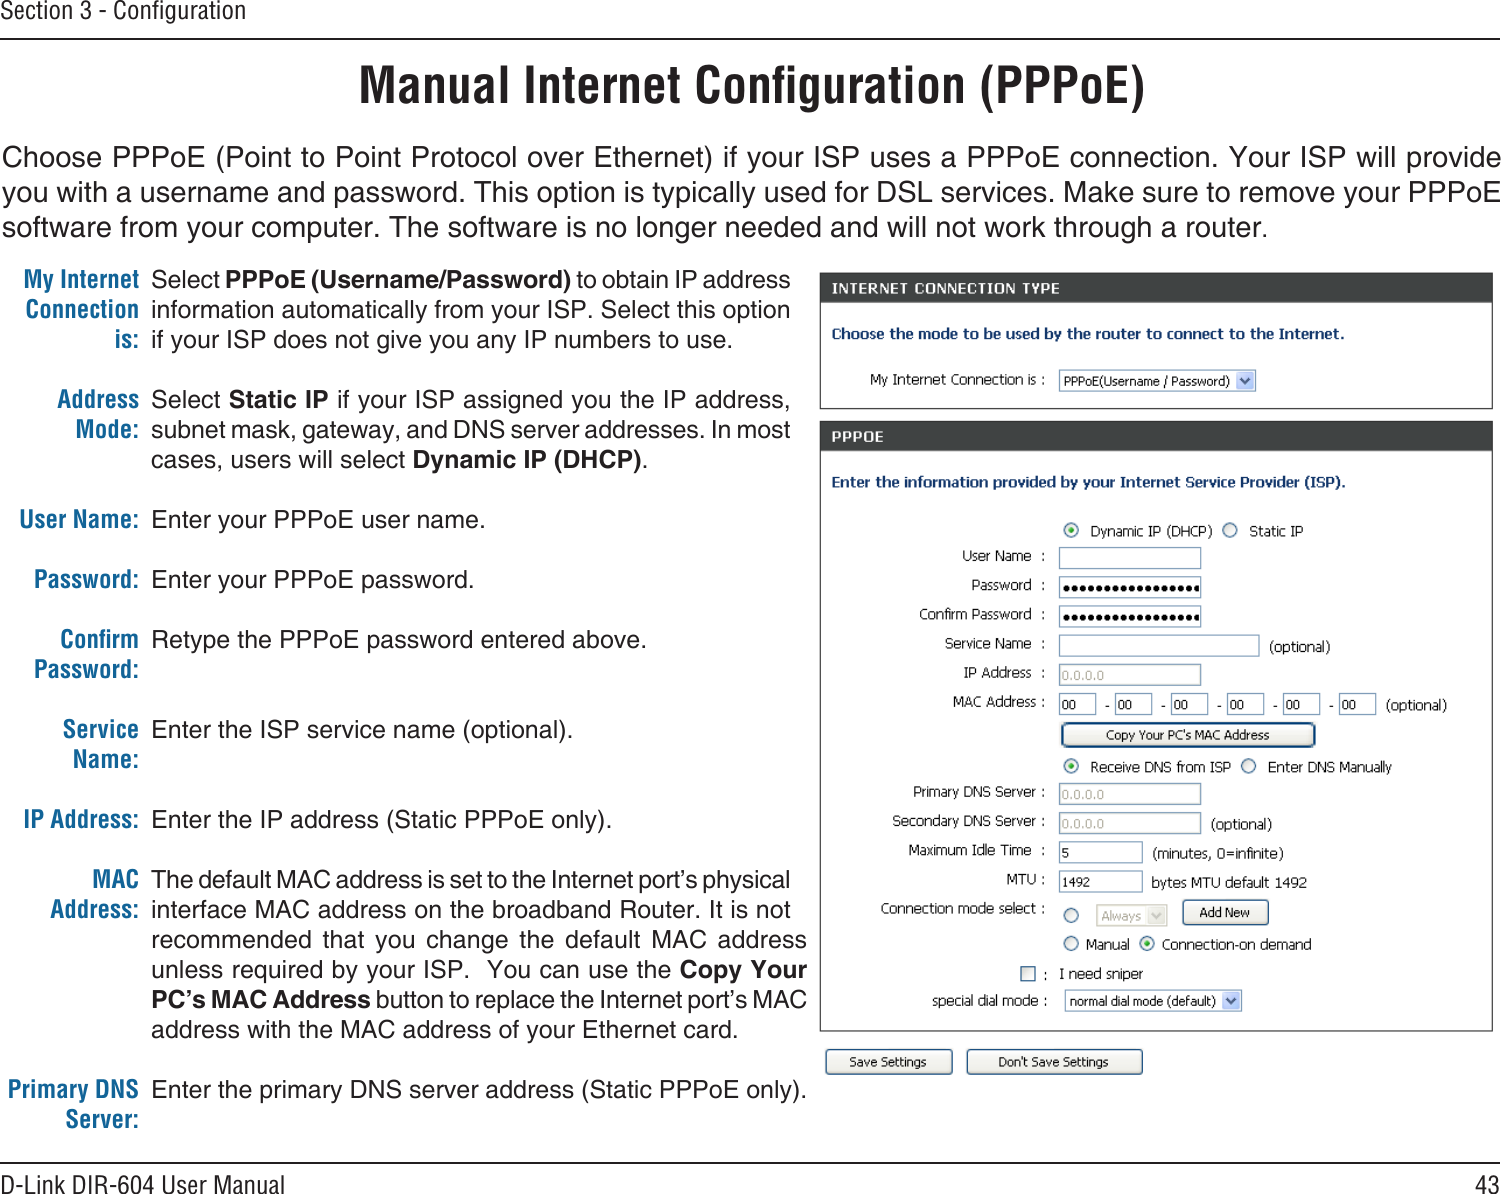 43D-Link DIR-604 User ManualSection 3 - ConﬁgurationChoose PPPoE (Point to Point Protocol over Ethernet) if your ISP uses a PPPoE connection. Your ISP will provide you with a username and password. This option is typically used for DSL services. Make sure to remove your PPPoE software from your computer. The software is no longer needed and will not work through a router. Manual Internet Conﬁguration (PPPoE)Select PPPoE (Username/Password) to obtain IP address information automatically from your ISP. Select this option if your ISP does not give you any IP numbers to use.Select Static IP if your ISP assigned you the IP address, subnet mask, gateway, and DNS server addresses. In most cases, users will select Dynamic IP (DHCP).Enter your PPPoE user name.Enter your PPPoE password.Retype the PPPoE password entered above.Enter the ISP service name (optional).Enter the IP address (Static PPPoE only).The default MAC address is set to the Internet port’s physical interface MAC address on the broadband Router. It is not recommended  that  you  change  the  default  MAC  address unless required by your ISP.  You can use the Copy Your PC’s MAC Address button to replace the Internet port’s MAC address with the MAC address of your Ethernet card.Enter the primary DNS server address (Static PPPoE only).My Internet Connection is:Address Mode: User Name:Password:Conﬁrm Password: Service Name:IP Address:MAC Address:Primary DNS Server: